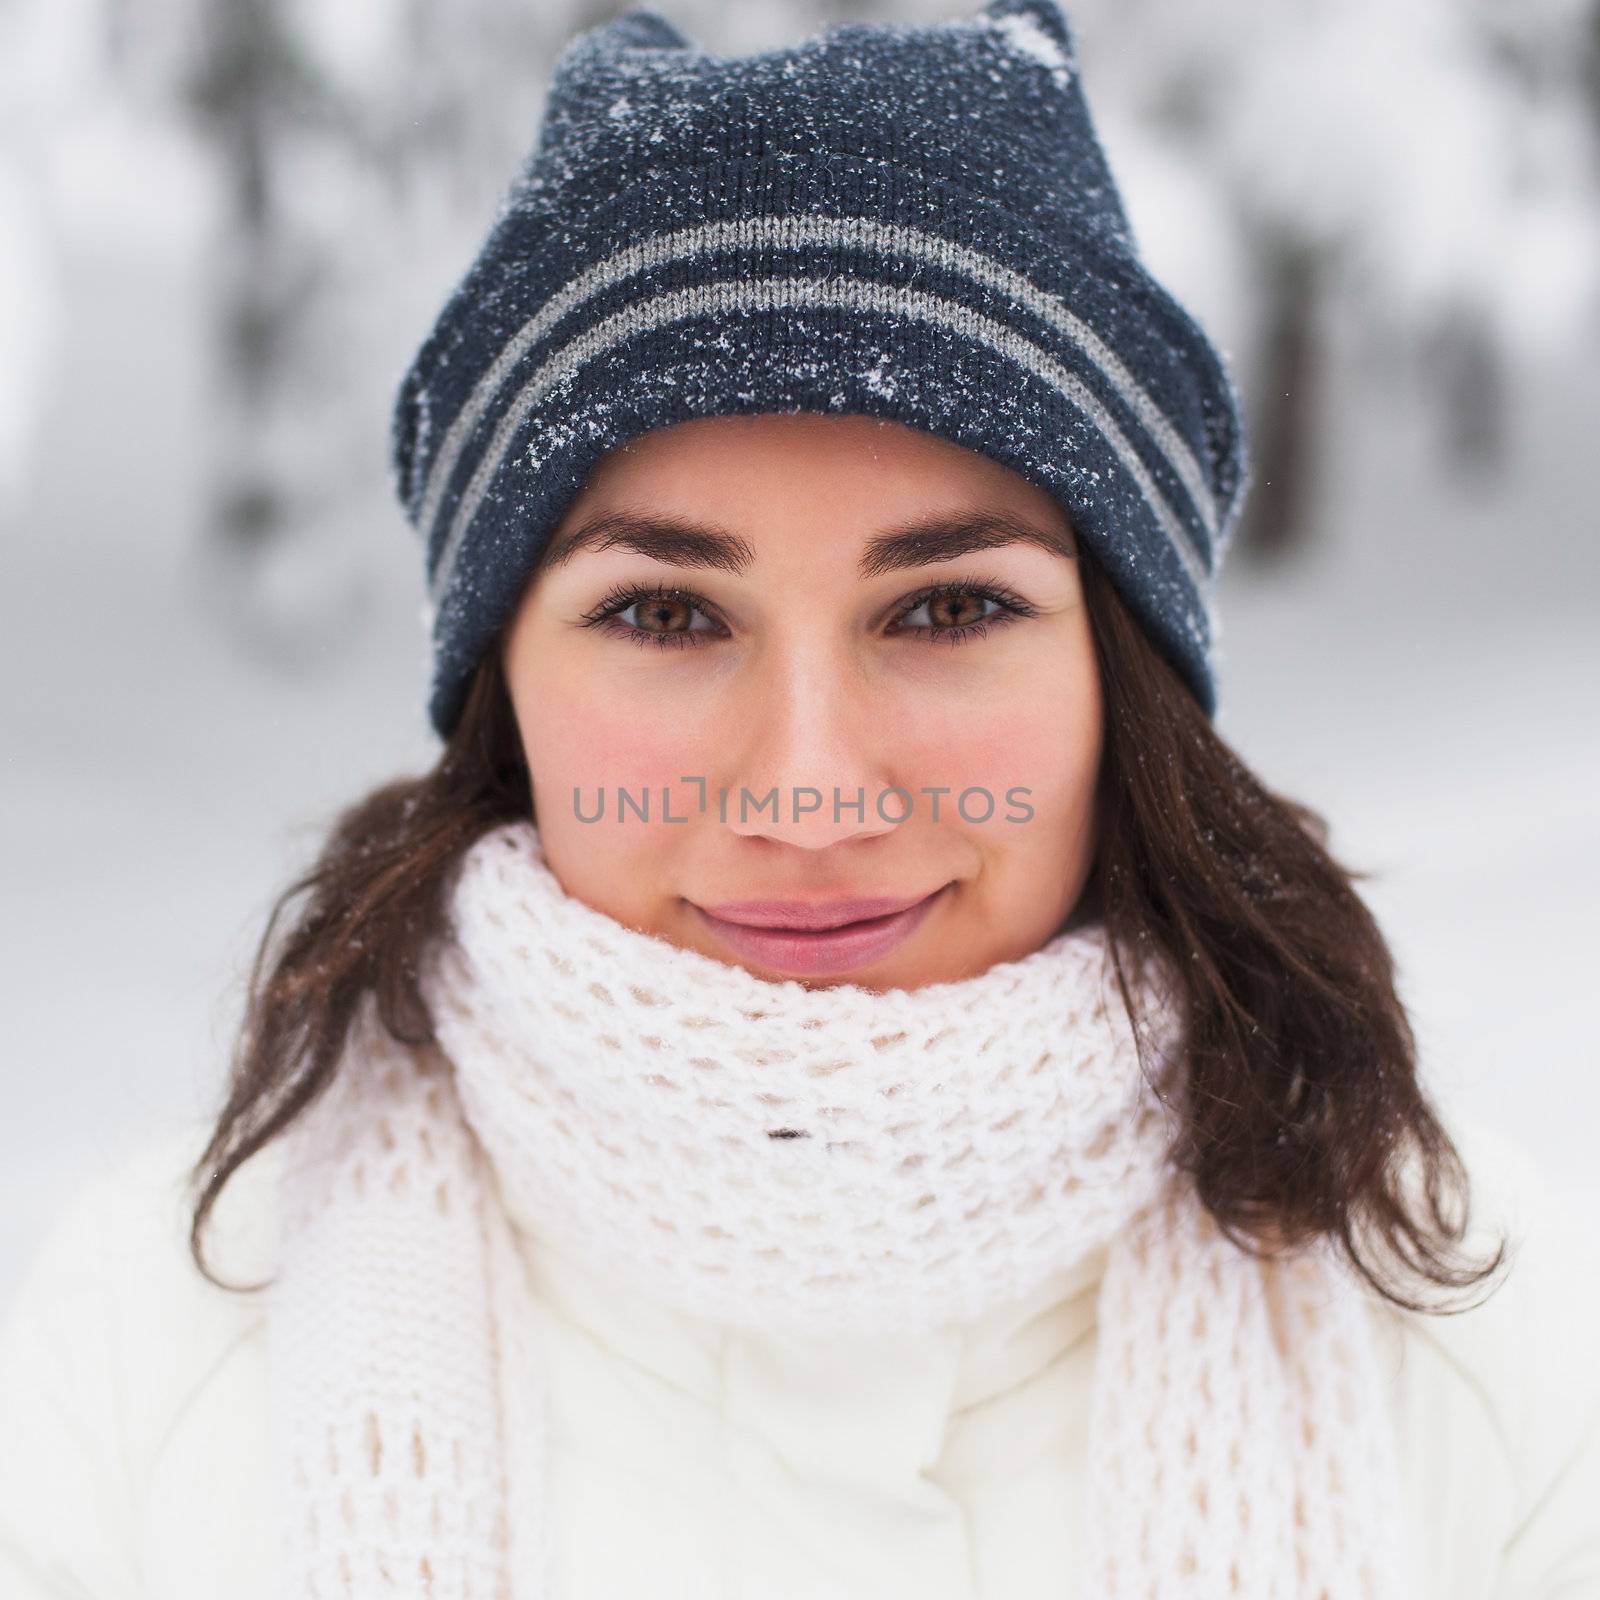 Portrait of beautiful young girl in winter day